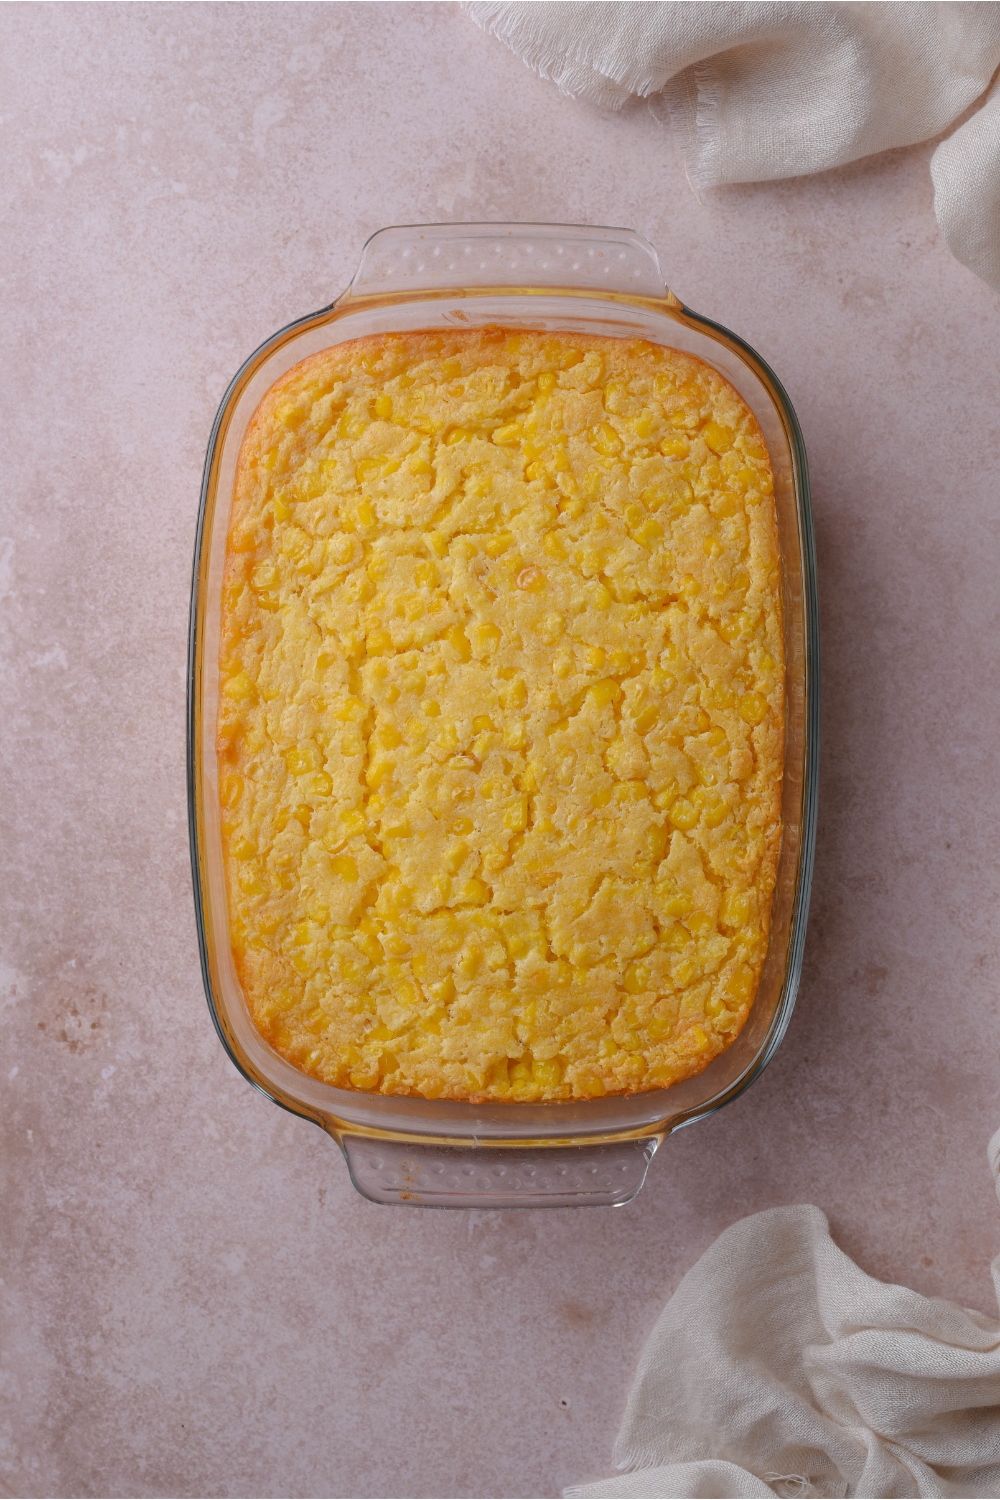 A baking dish filled with freshly baked corn casserole.